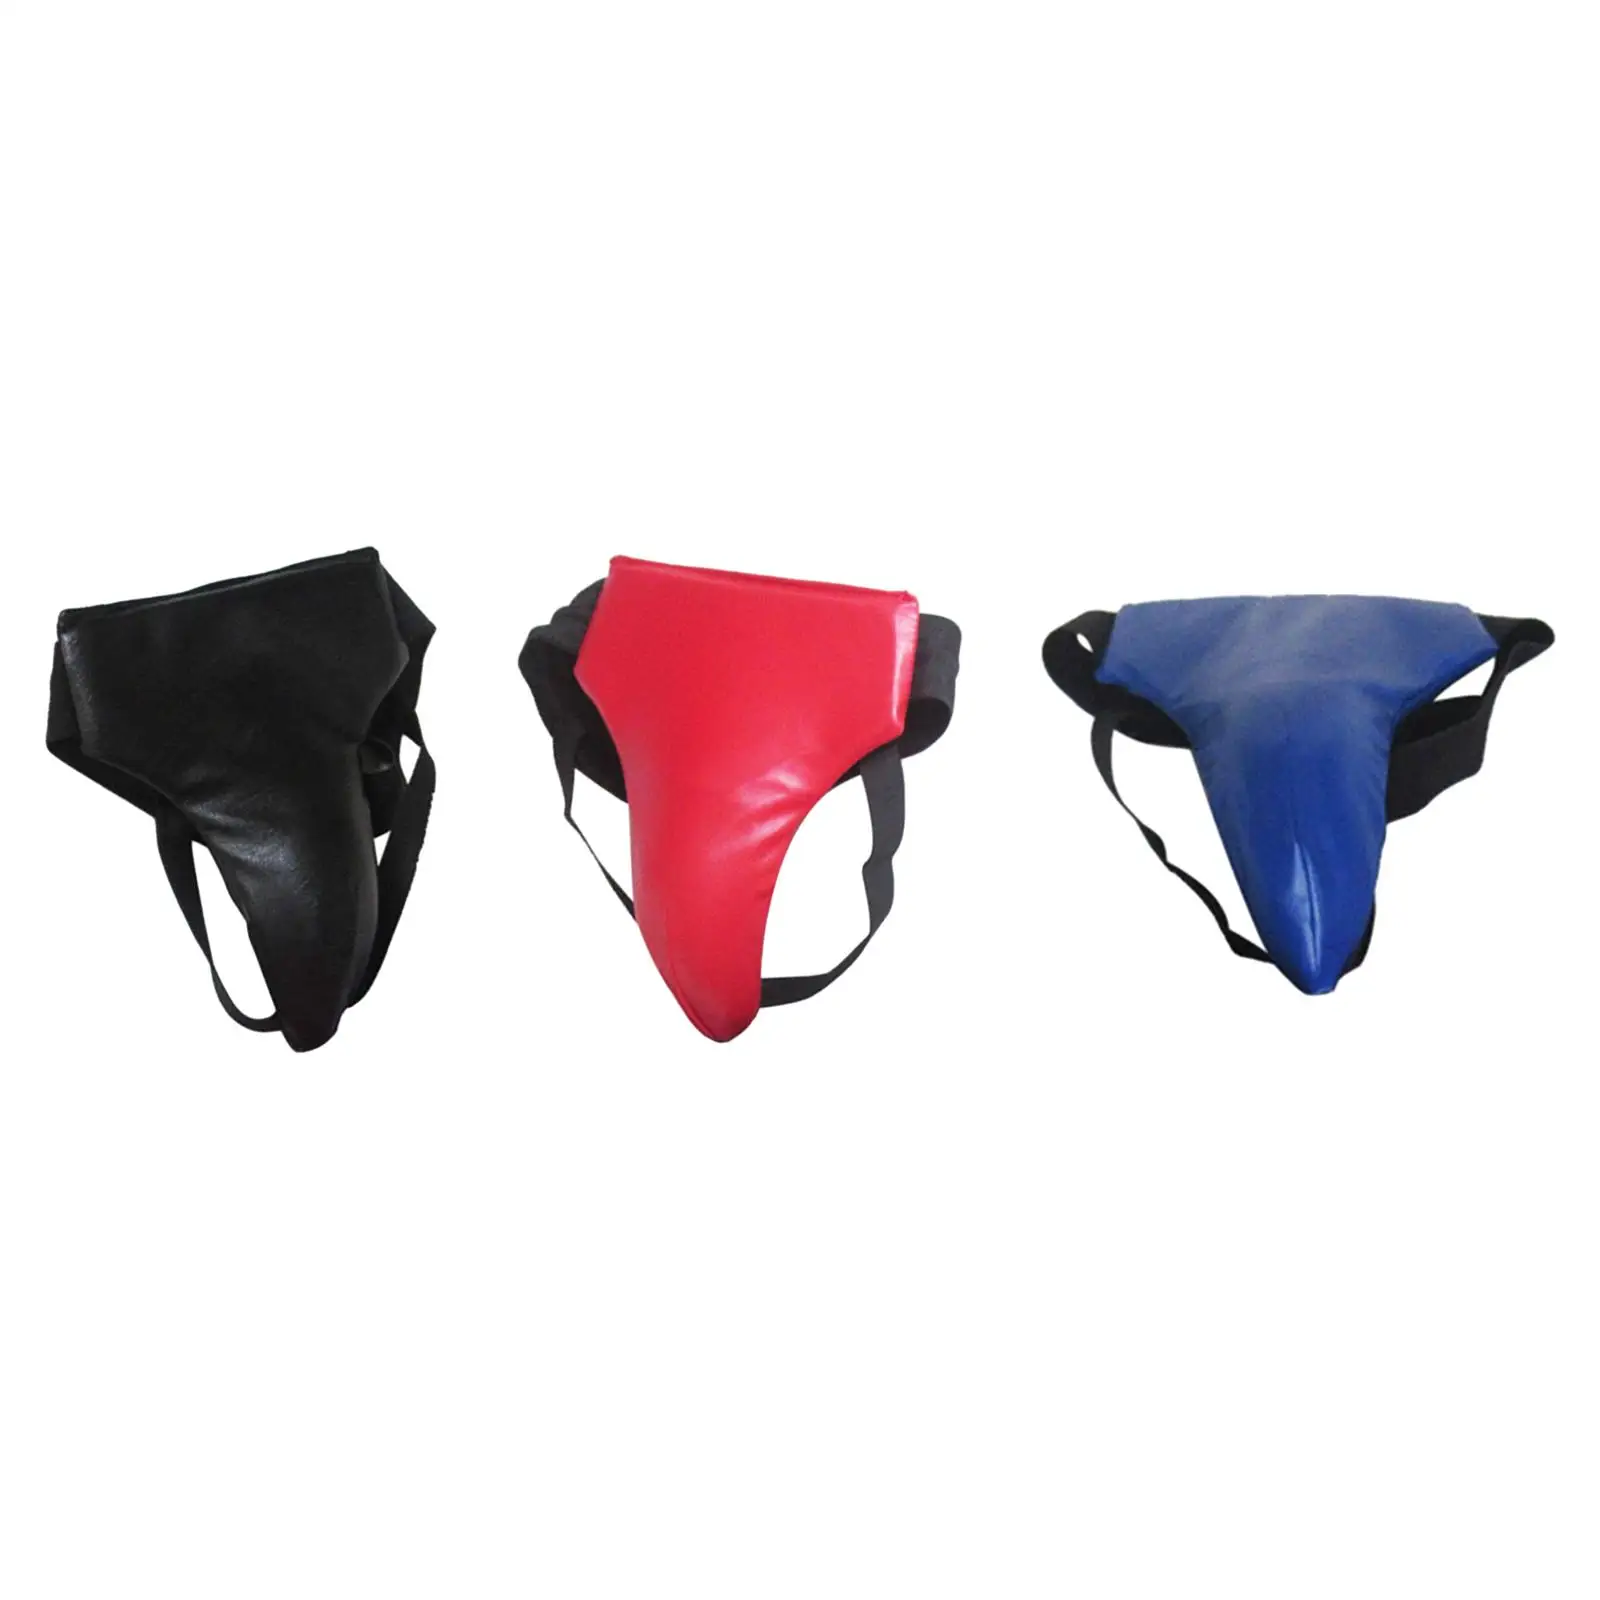 Mens Taekwondo Groin Protector Portable Men Abdominal Protector Crotch Protector for Sports Workout Karate Sparring Boxing